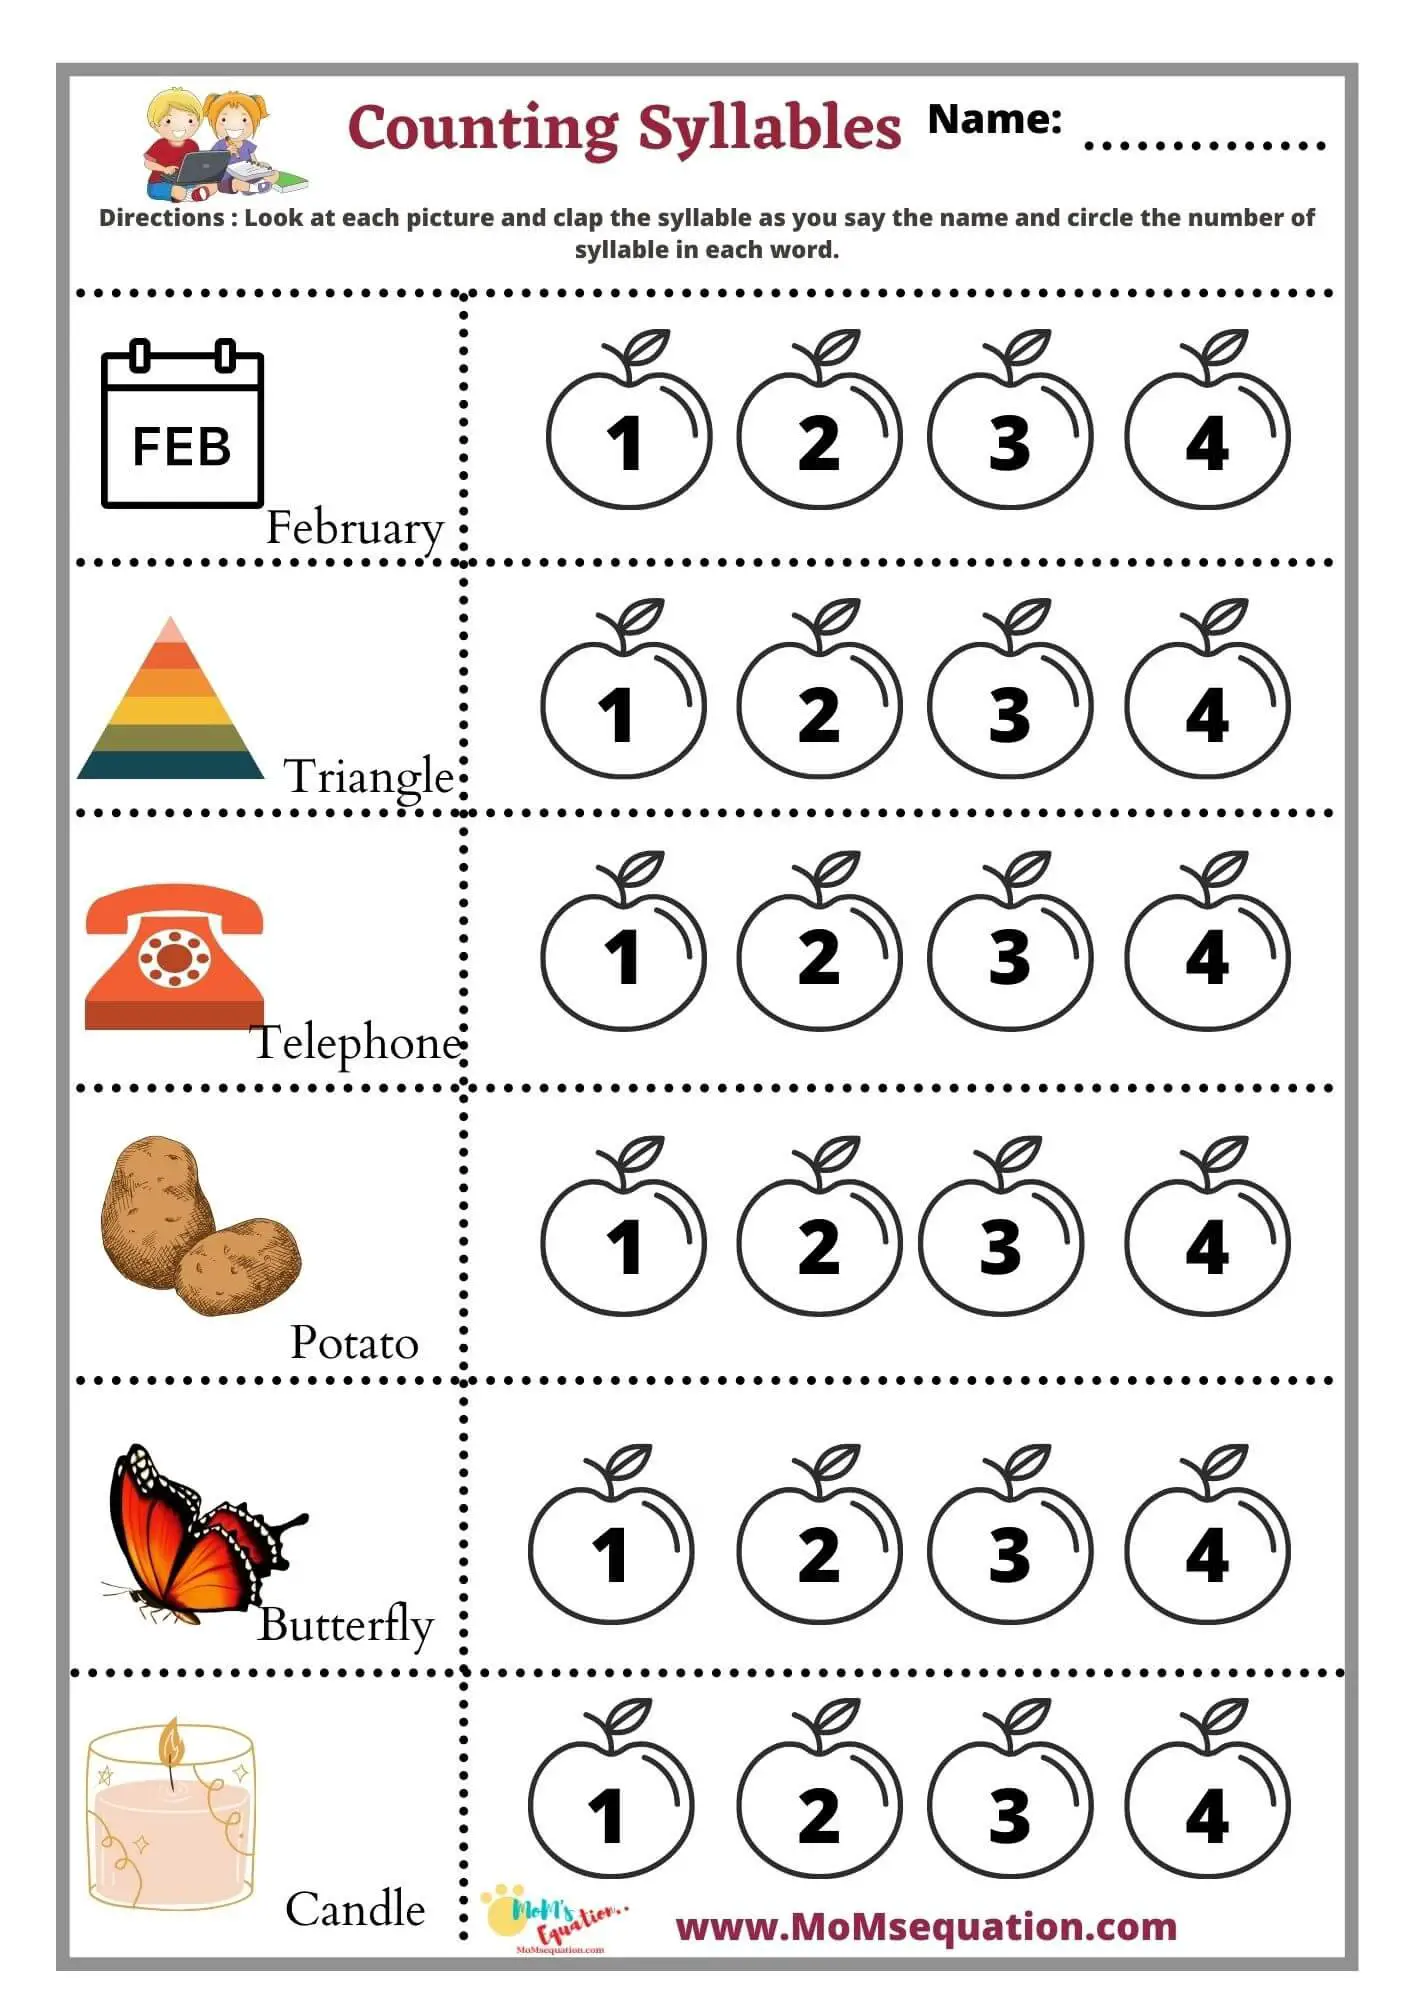 Counting Syllables worksheets phonics activity free pdf Mom sEquation